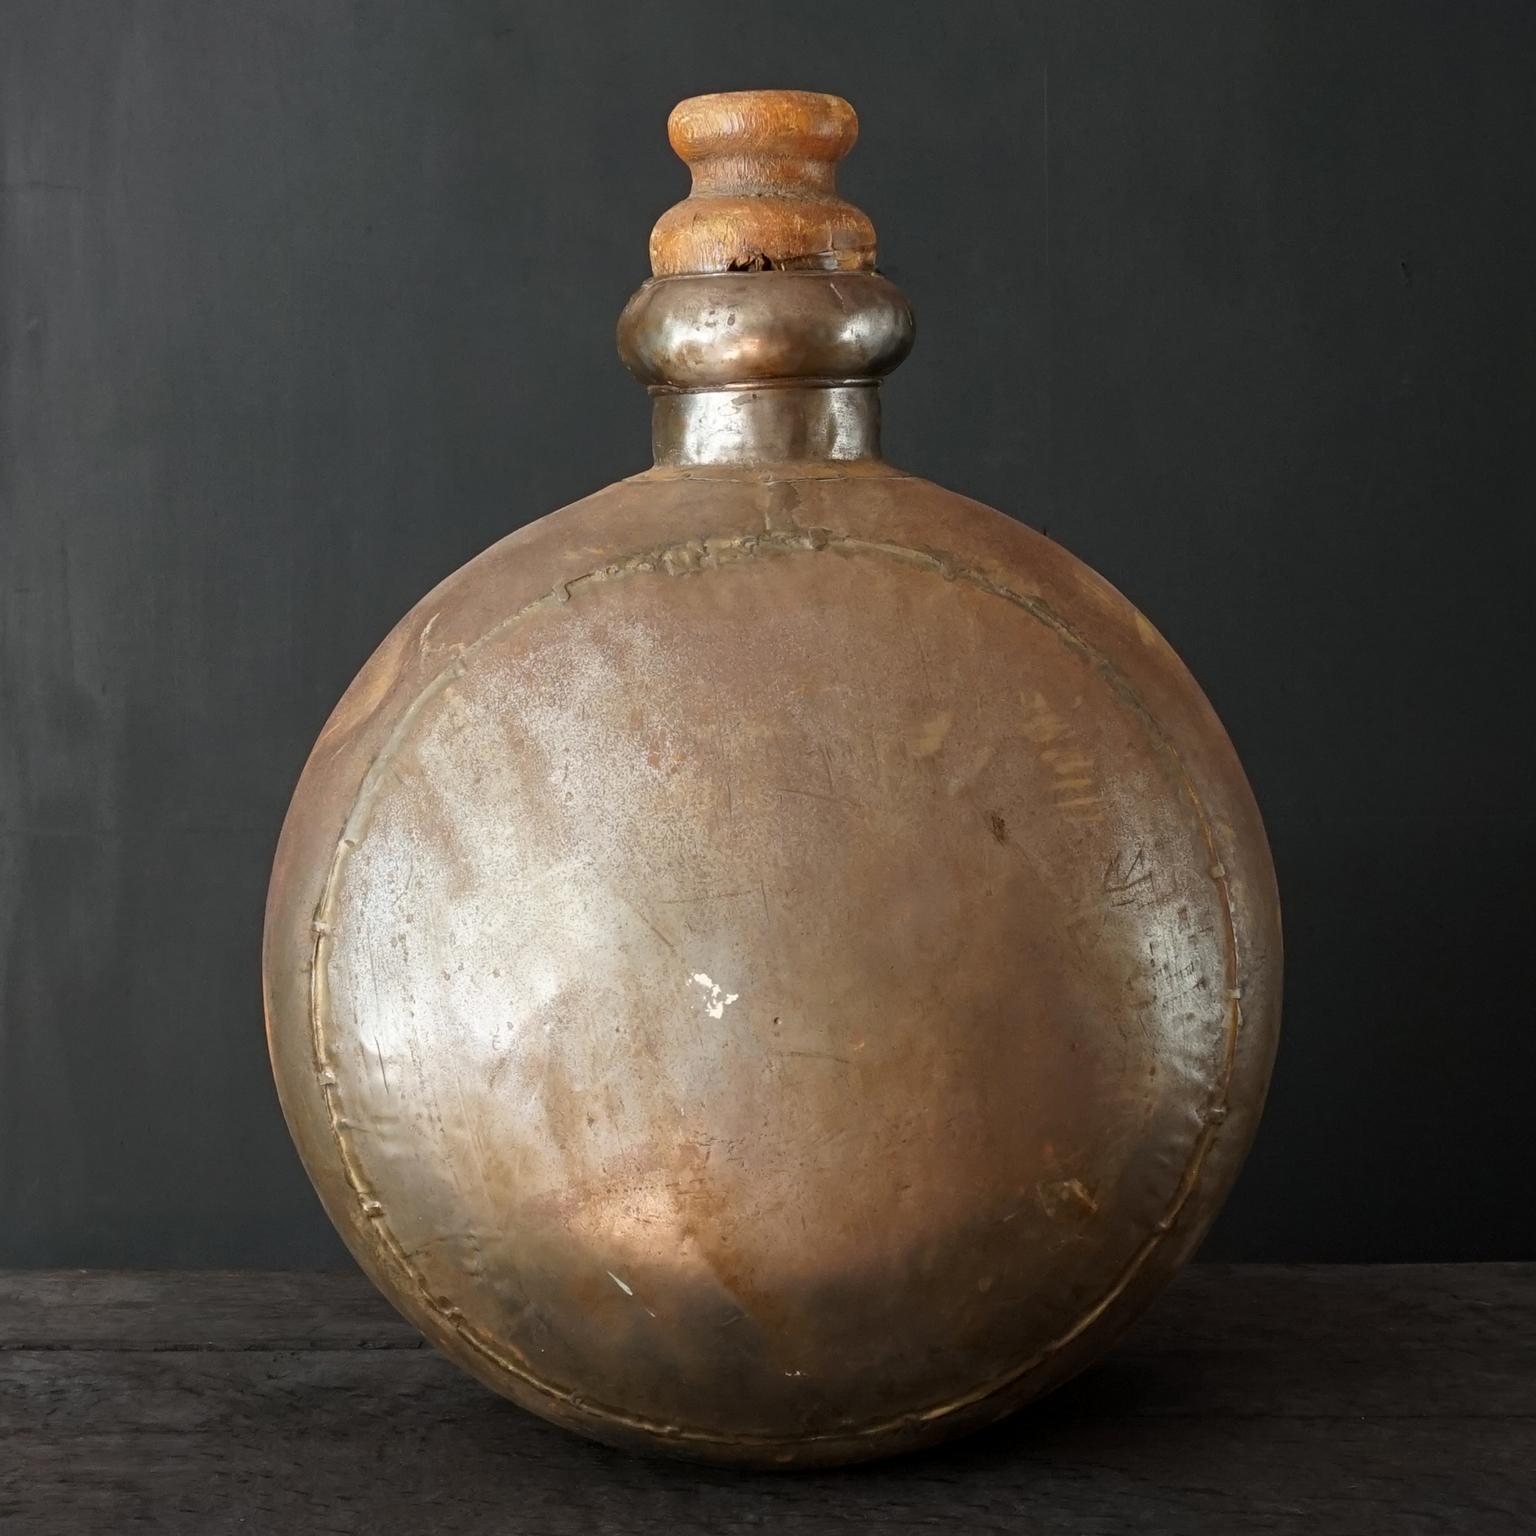 1950s Indian Hand-Hammered Large Metal Water Jug or Bottle with Wooden Cork For Sale 7